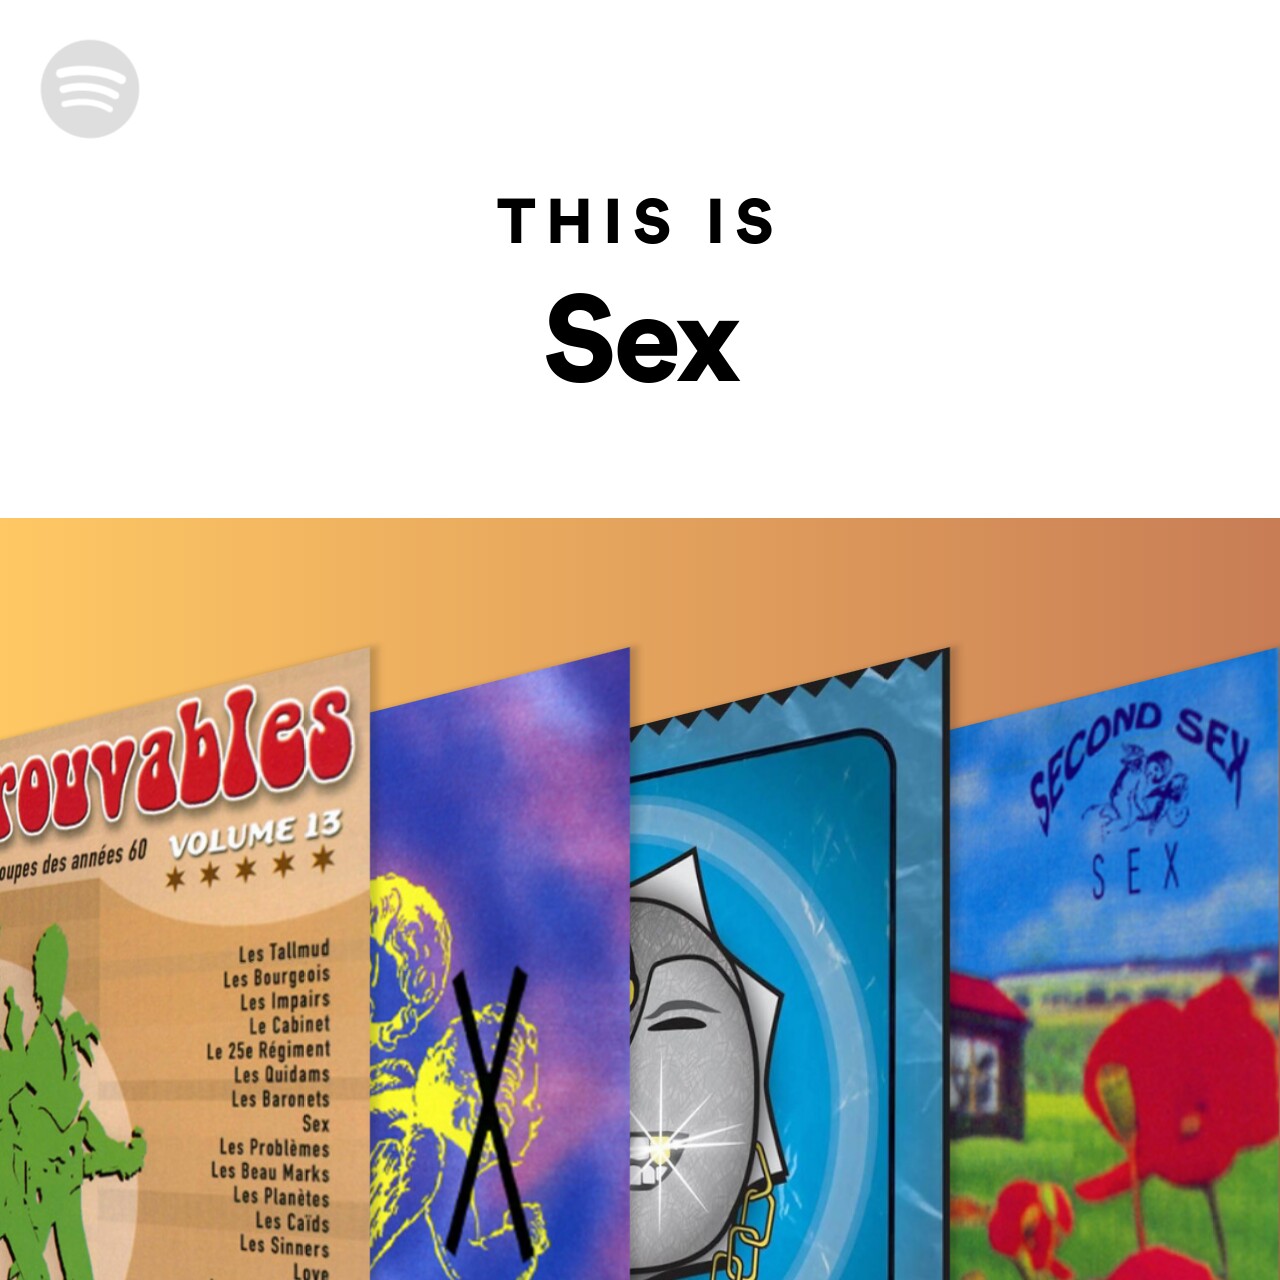 This Is Sex Spotify Playlist